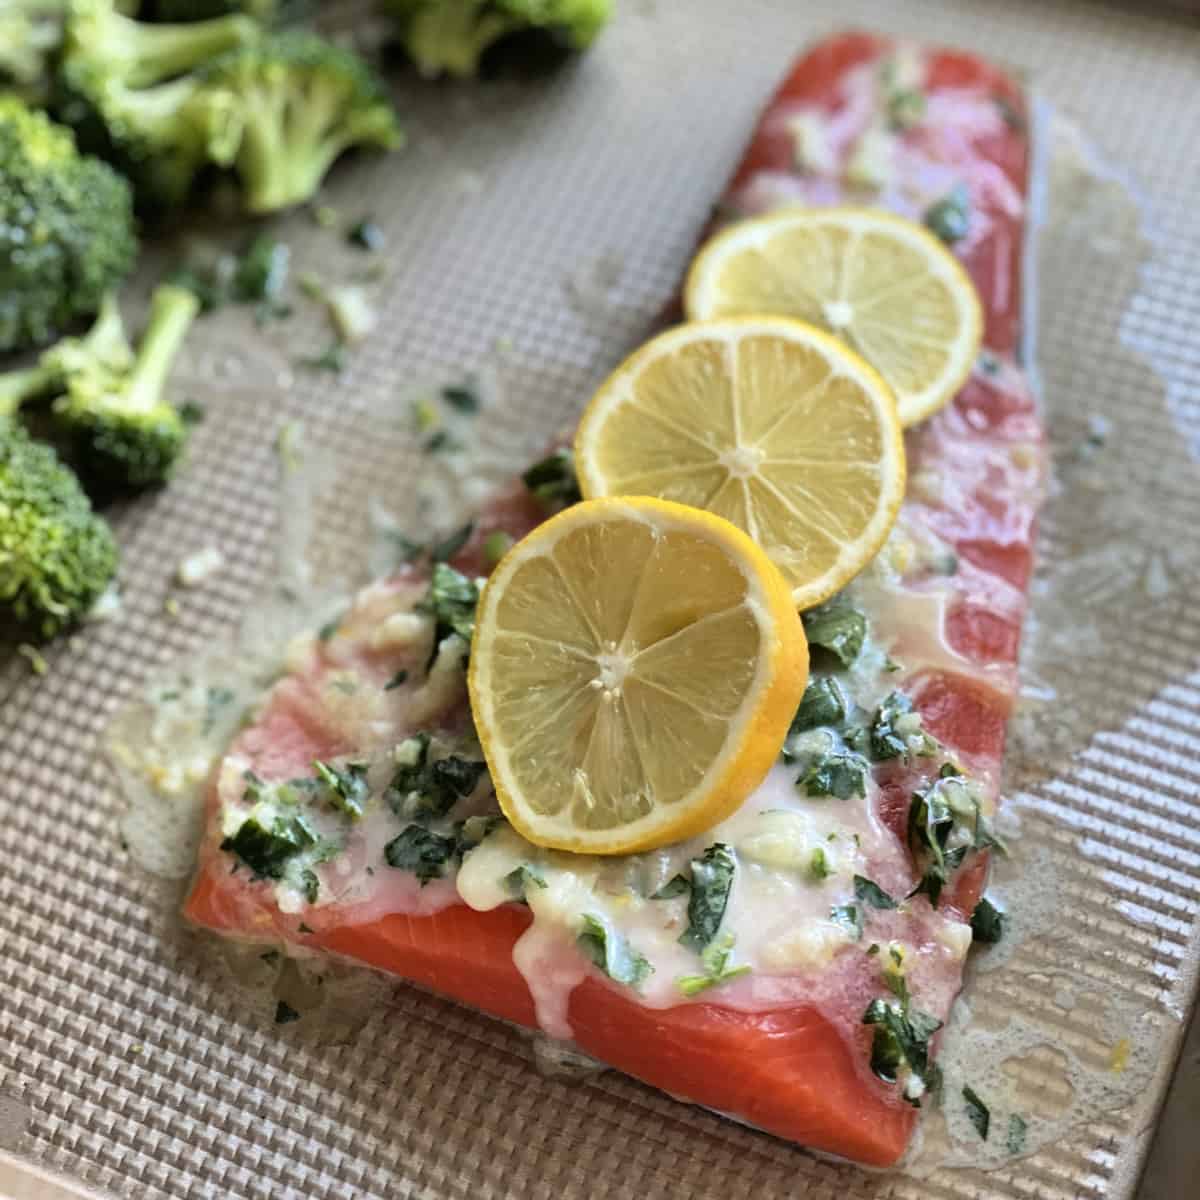 Large piece of raw salmon with three slices of lemon, butter, and herbs on a sheet pan.